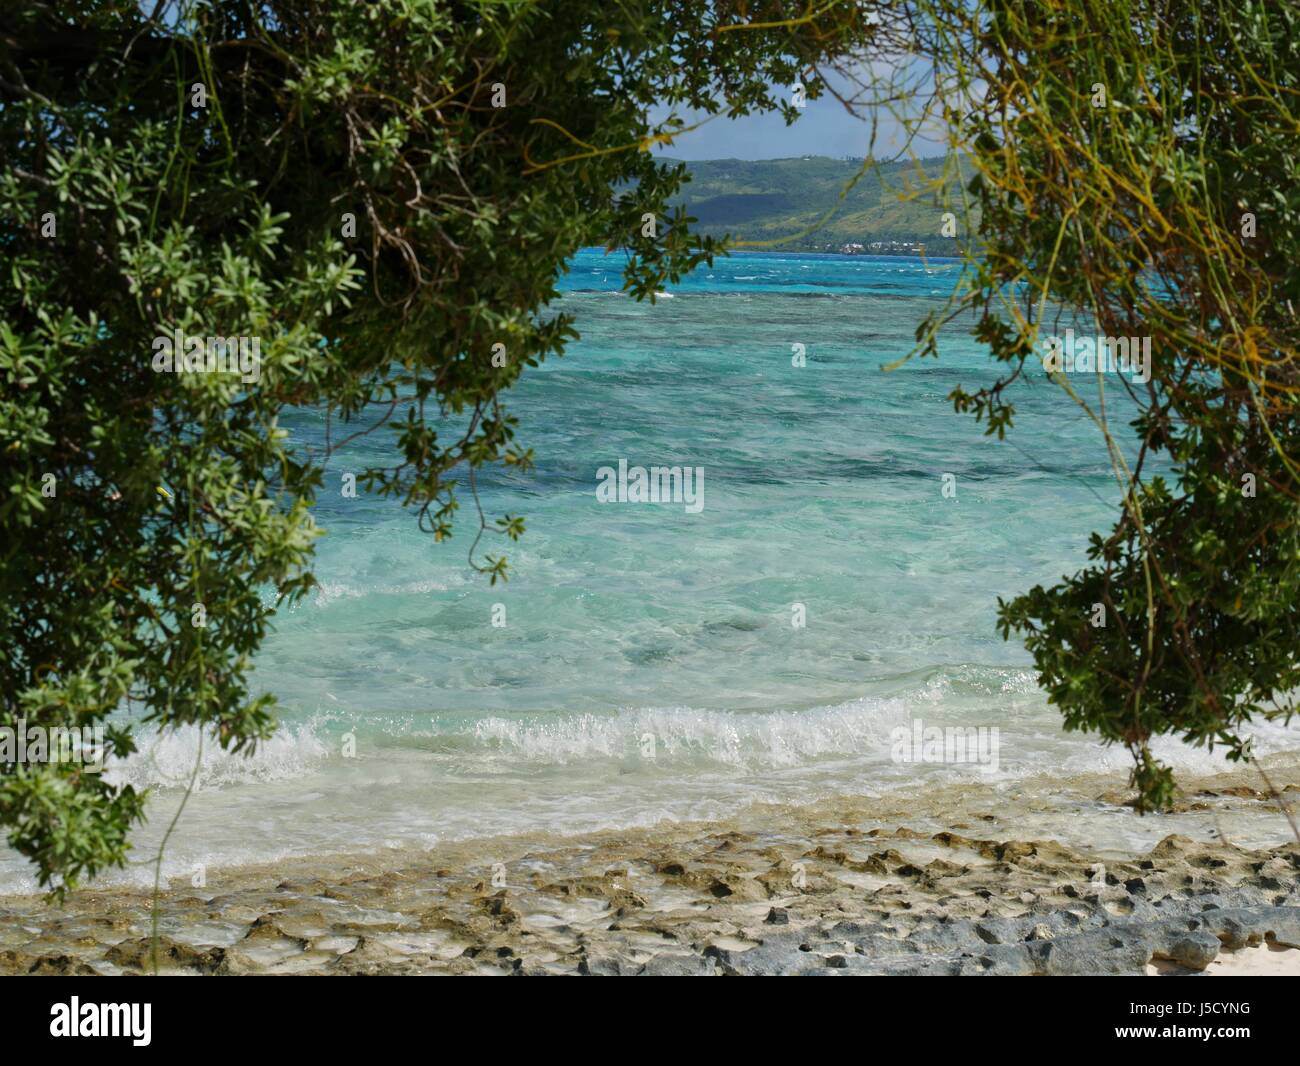 The rocky shoreline and clear blue waters at the backside of Managaha Island,  curtained by thick foliage. Stock Photo